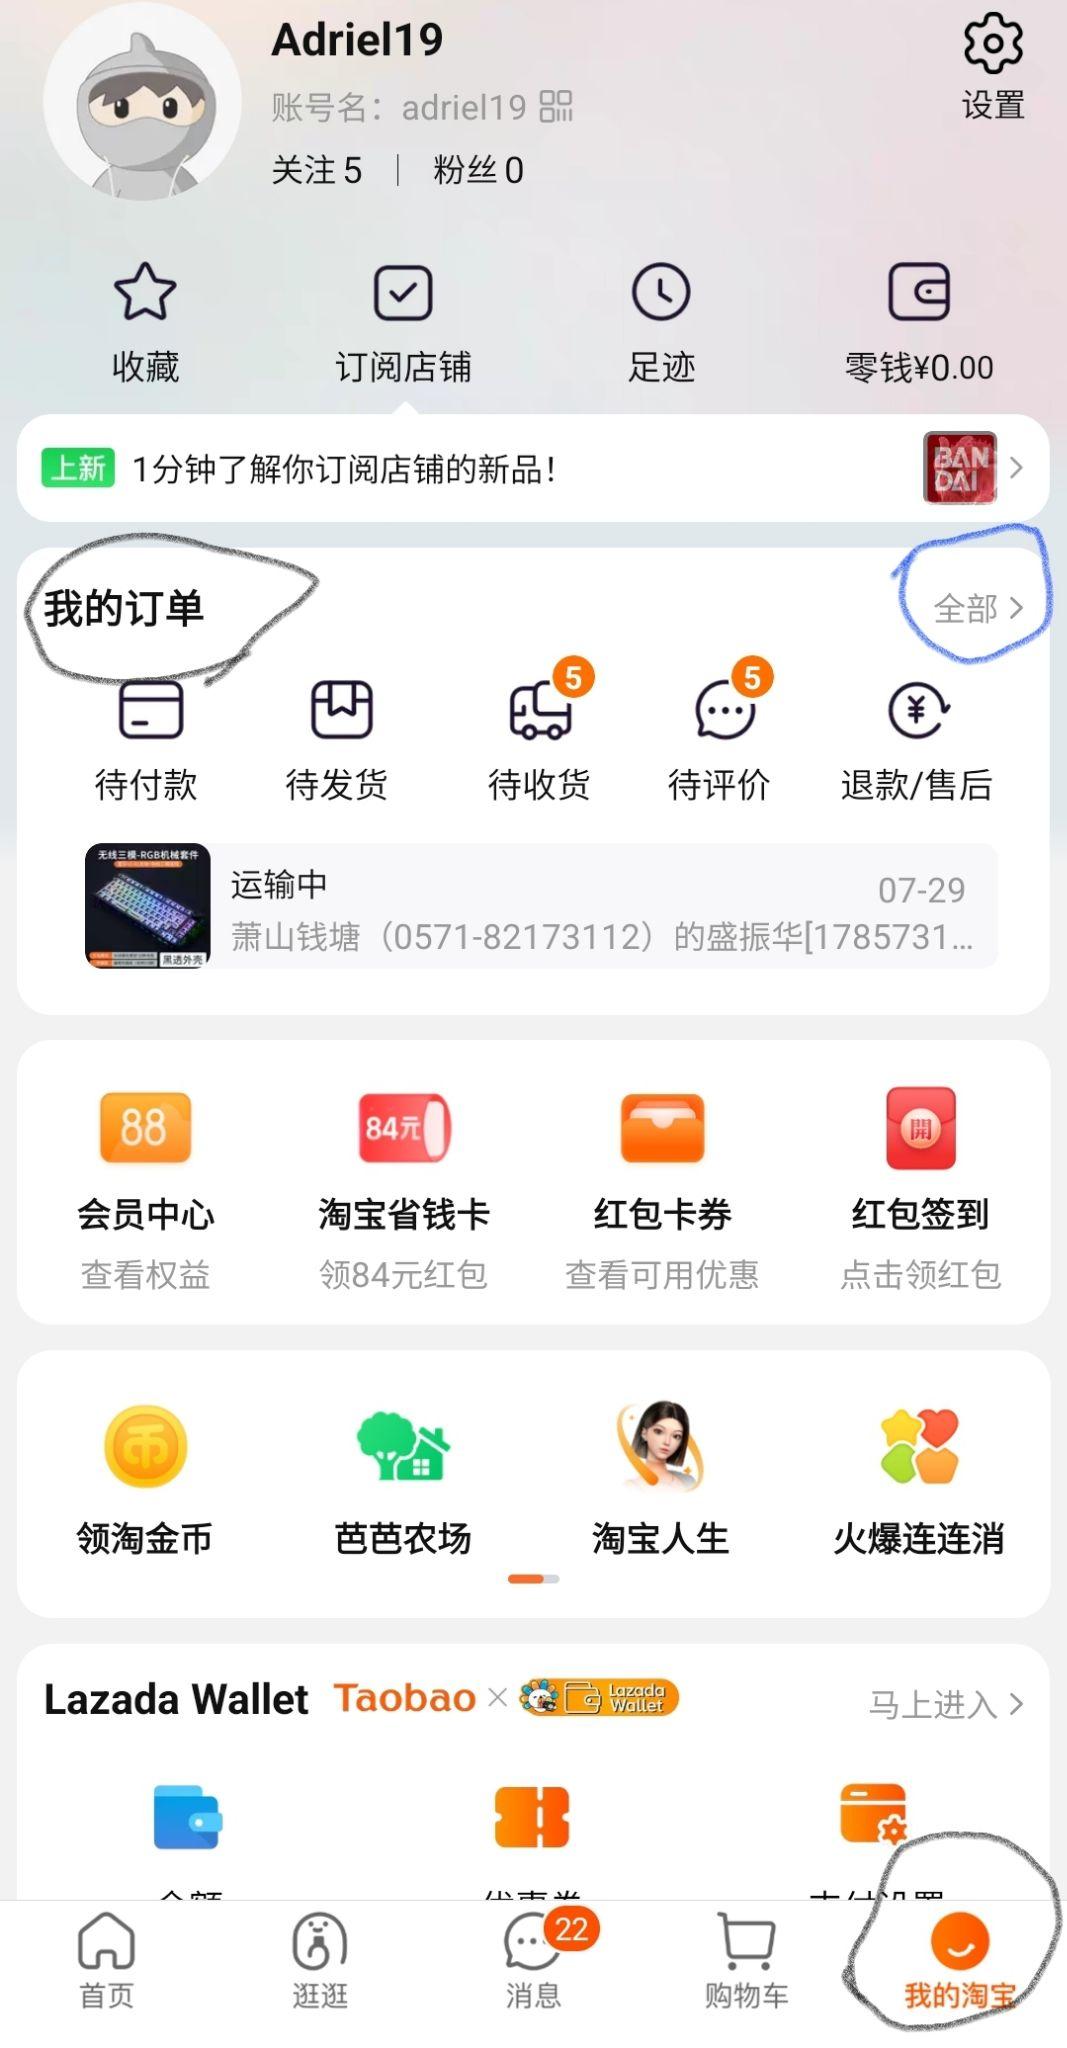 Chat with seller when an order is placed on mobile to chat with seller on Taobao